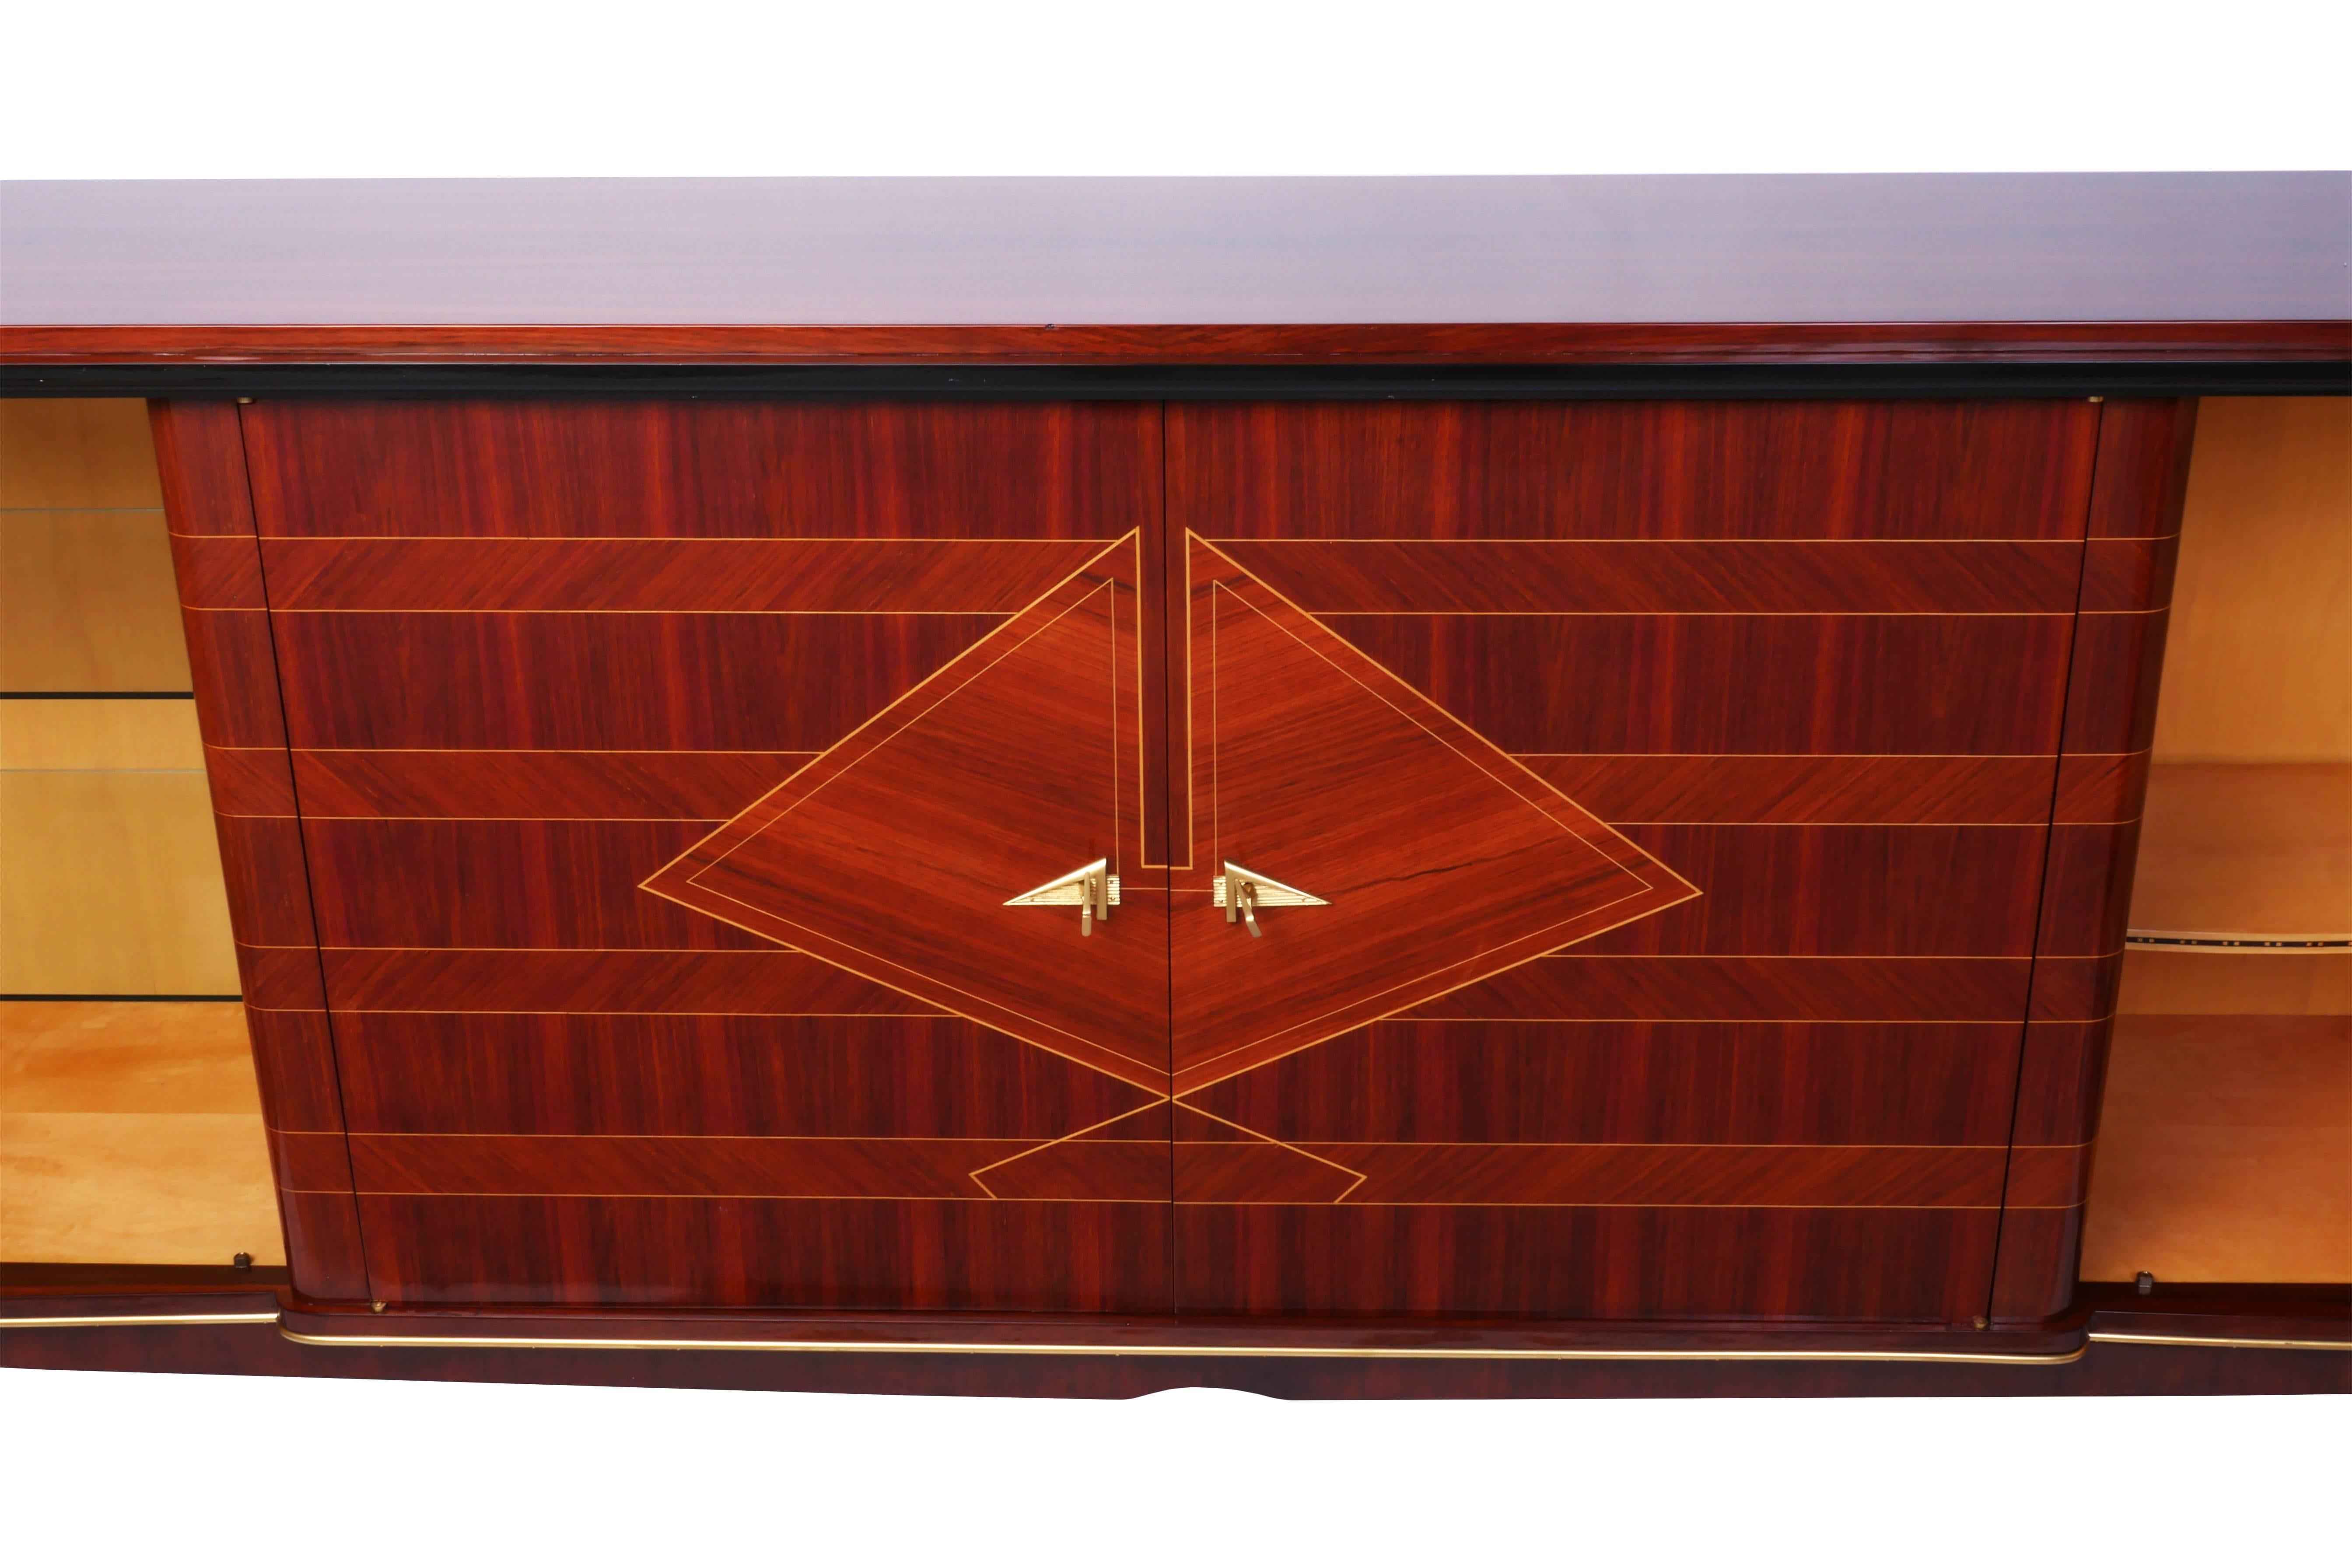 Wonderful French Art Deco buffet or sideboard in flame mahogany, with a gorgeous marquetry front with ivory inlay depicting a fan design. The piece features four doors concealing four glass shelves, four drawers with mirror fronts, and a bar area.